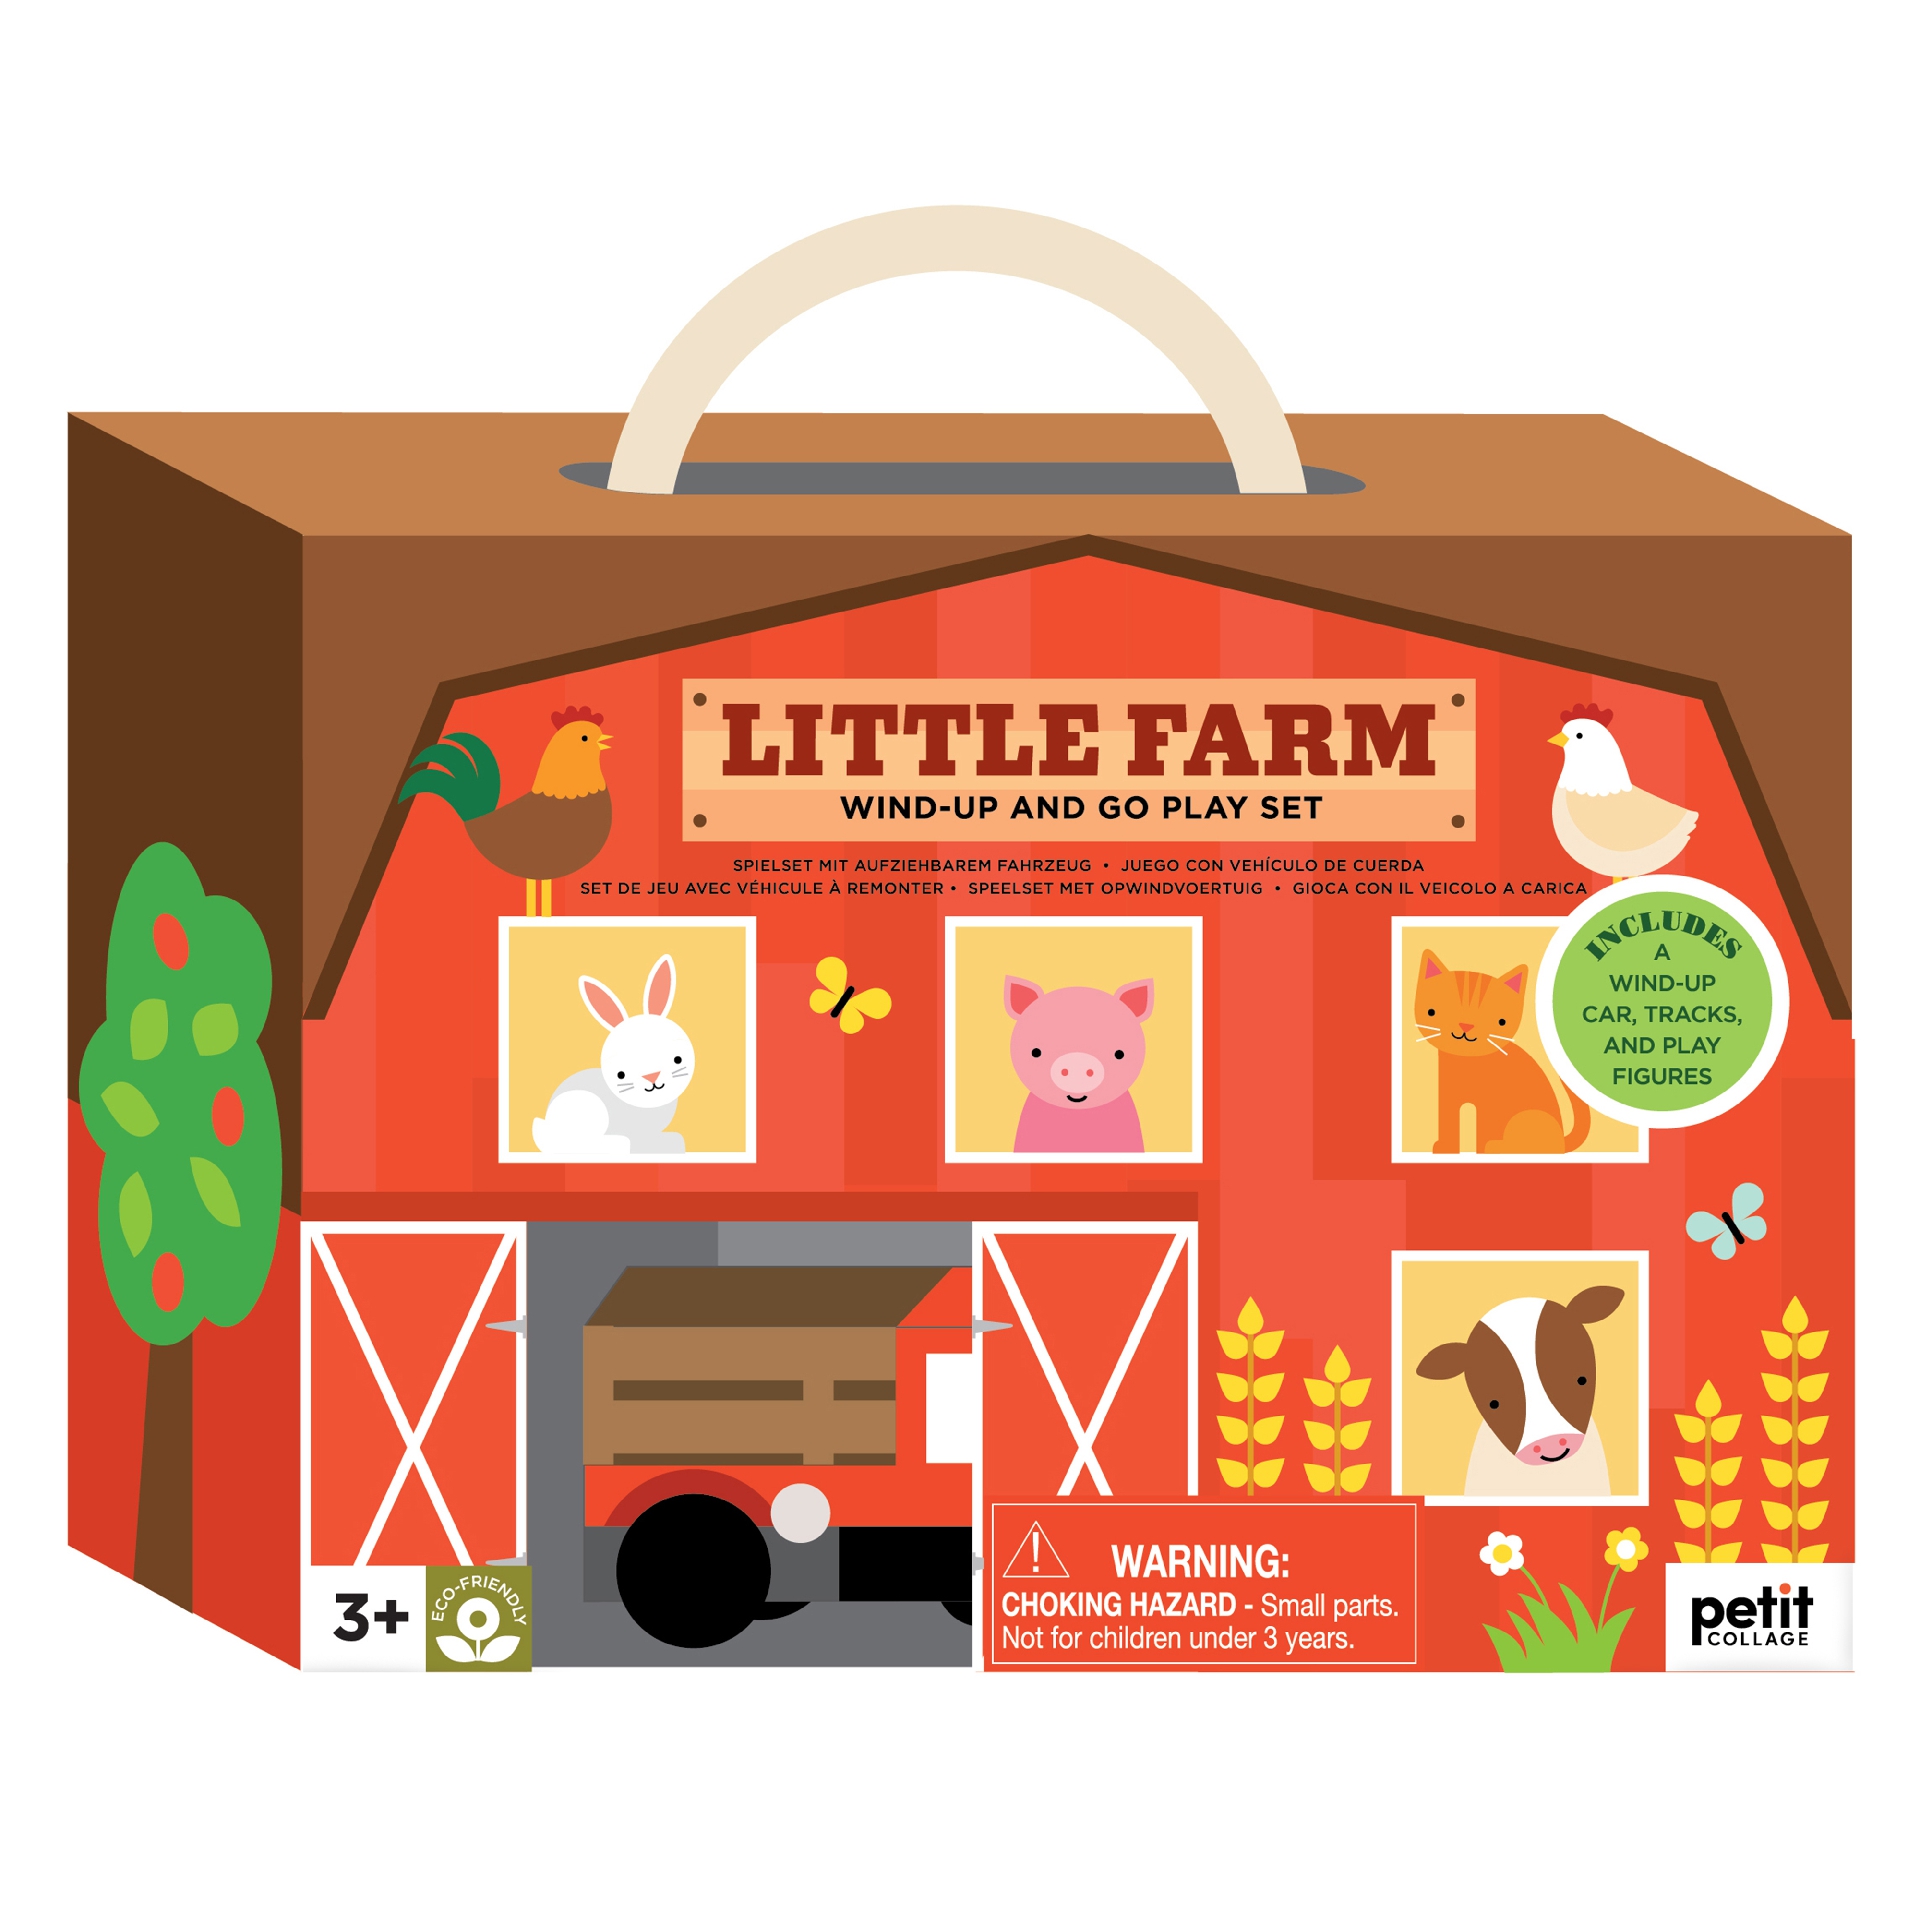 Little Farm Wind Up and Go Play Set